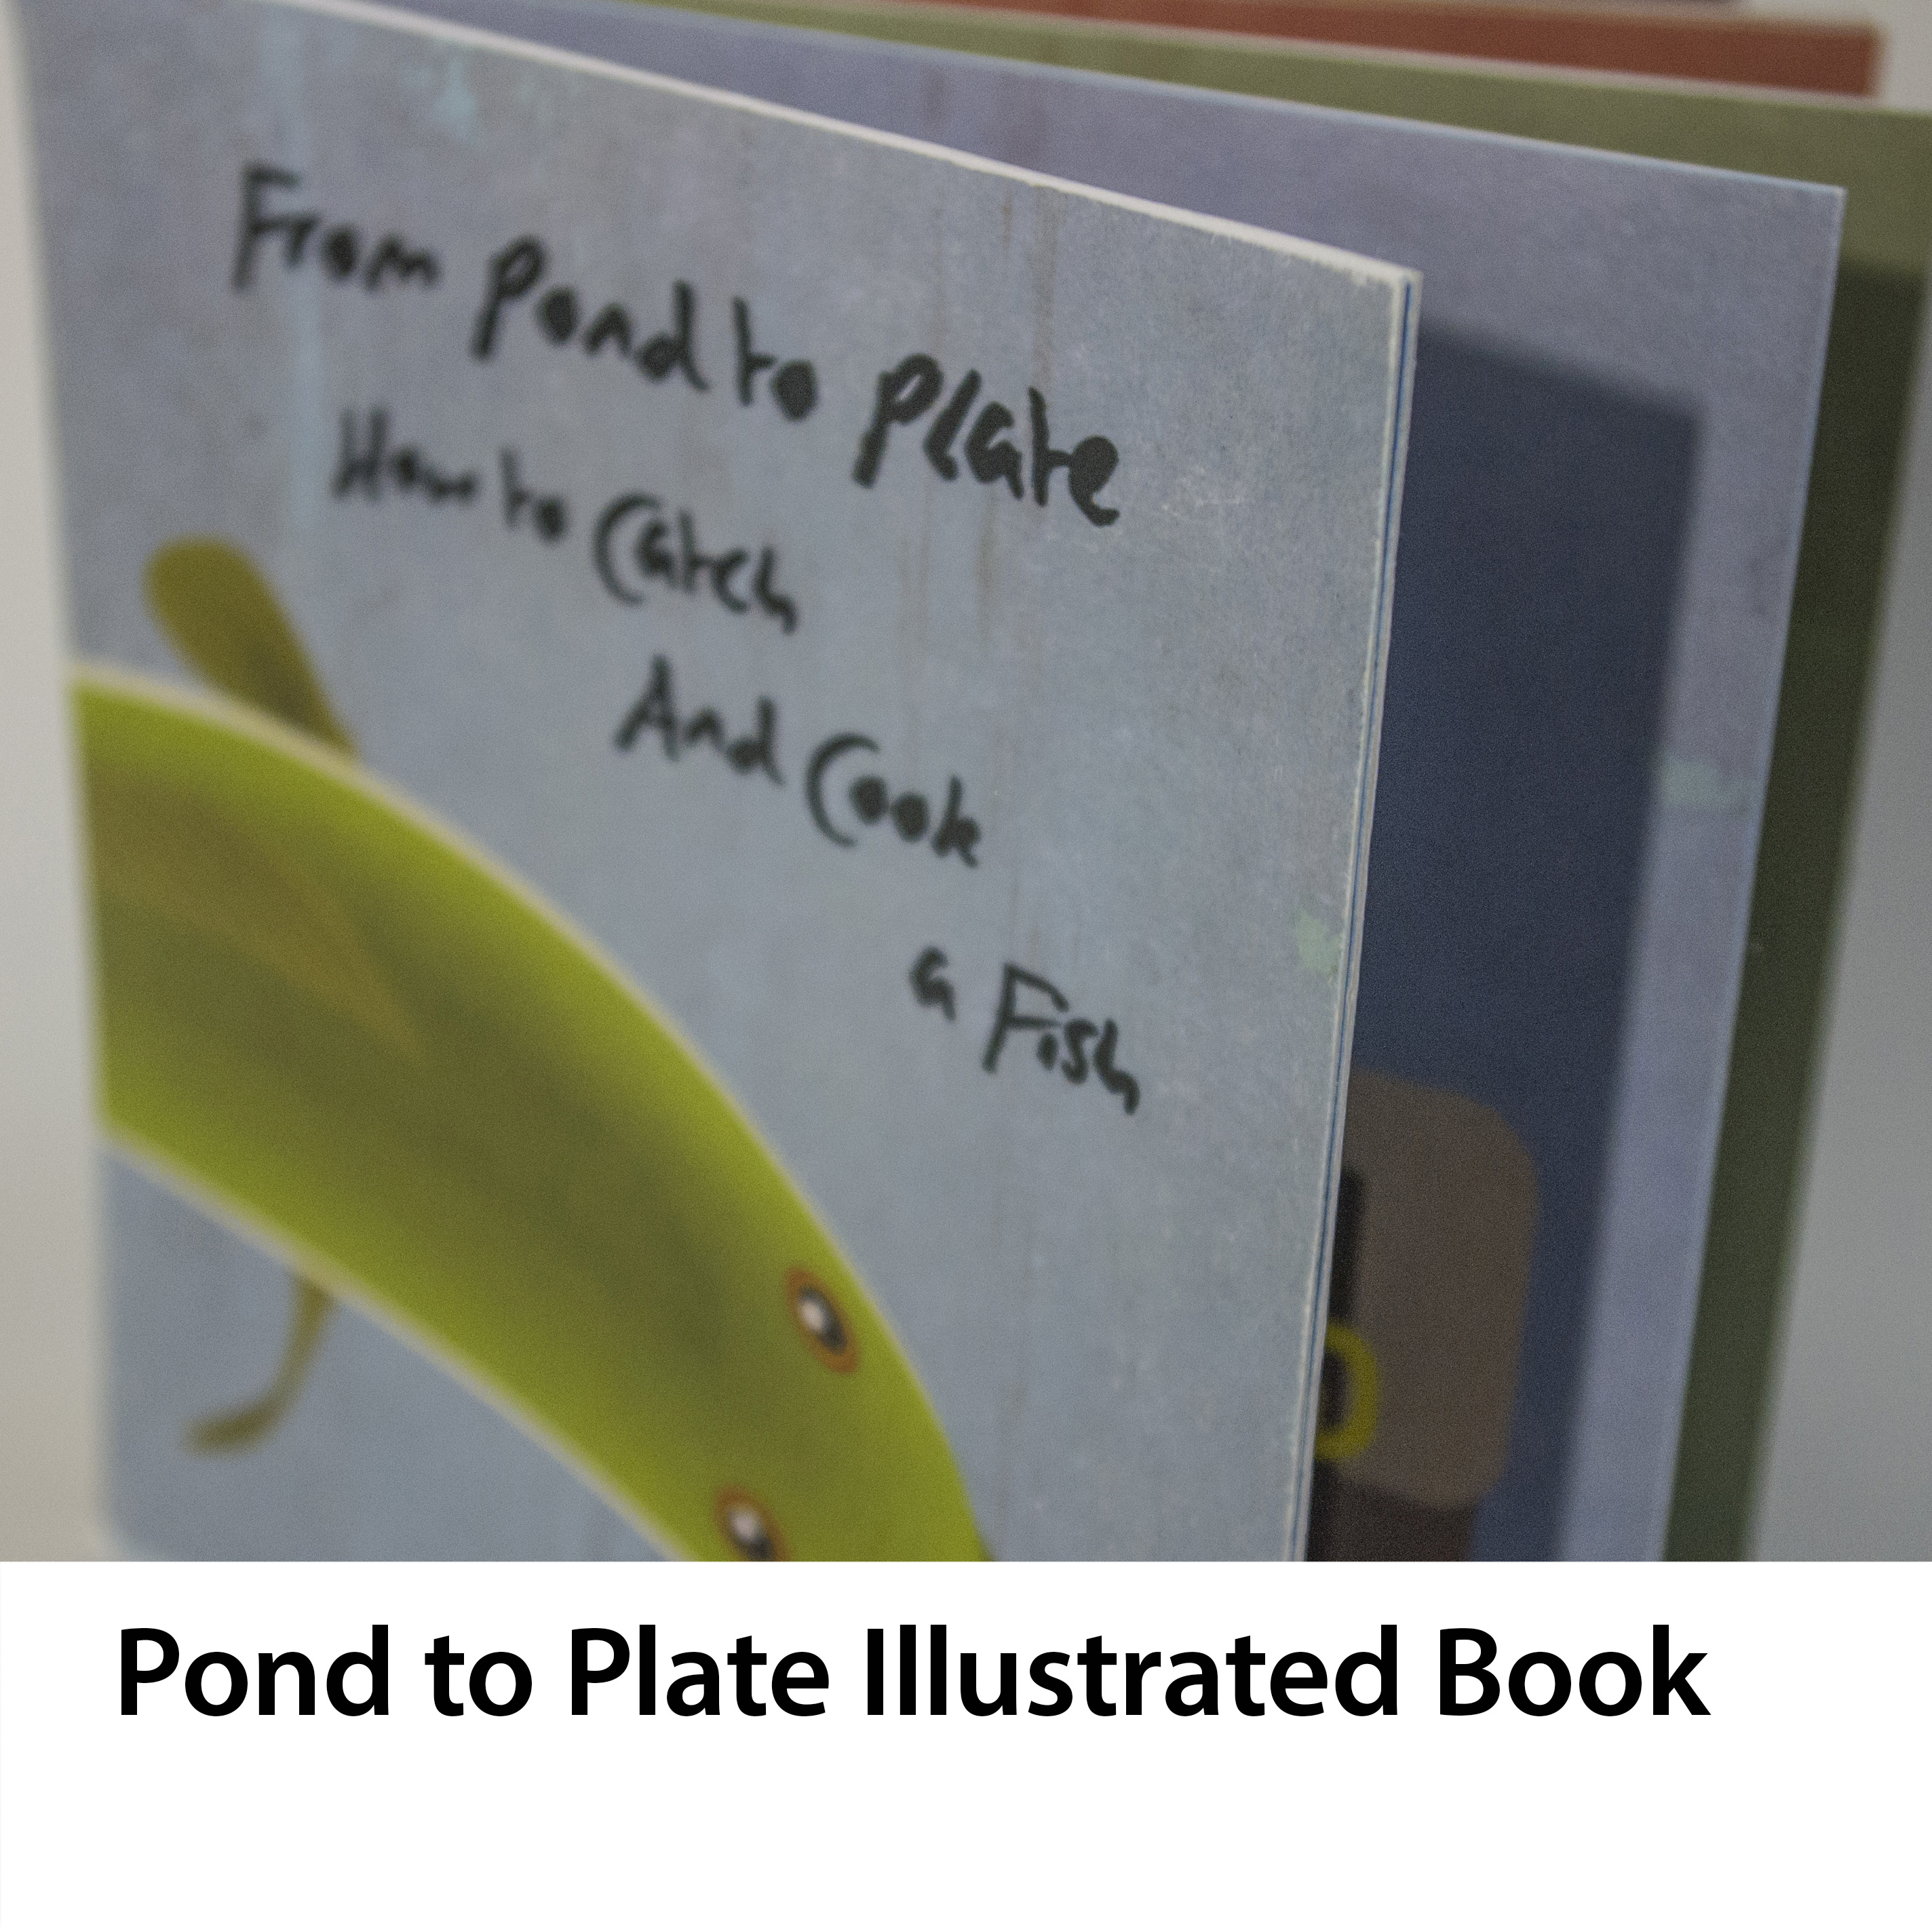 Pond to Plate